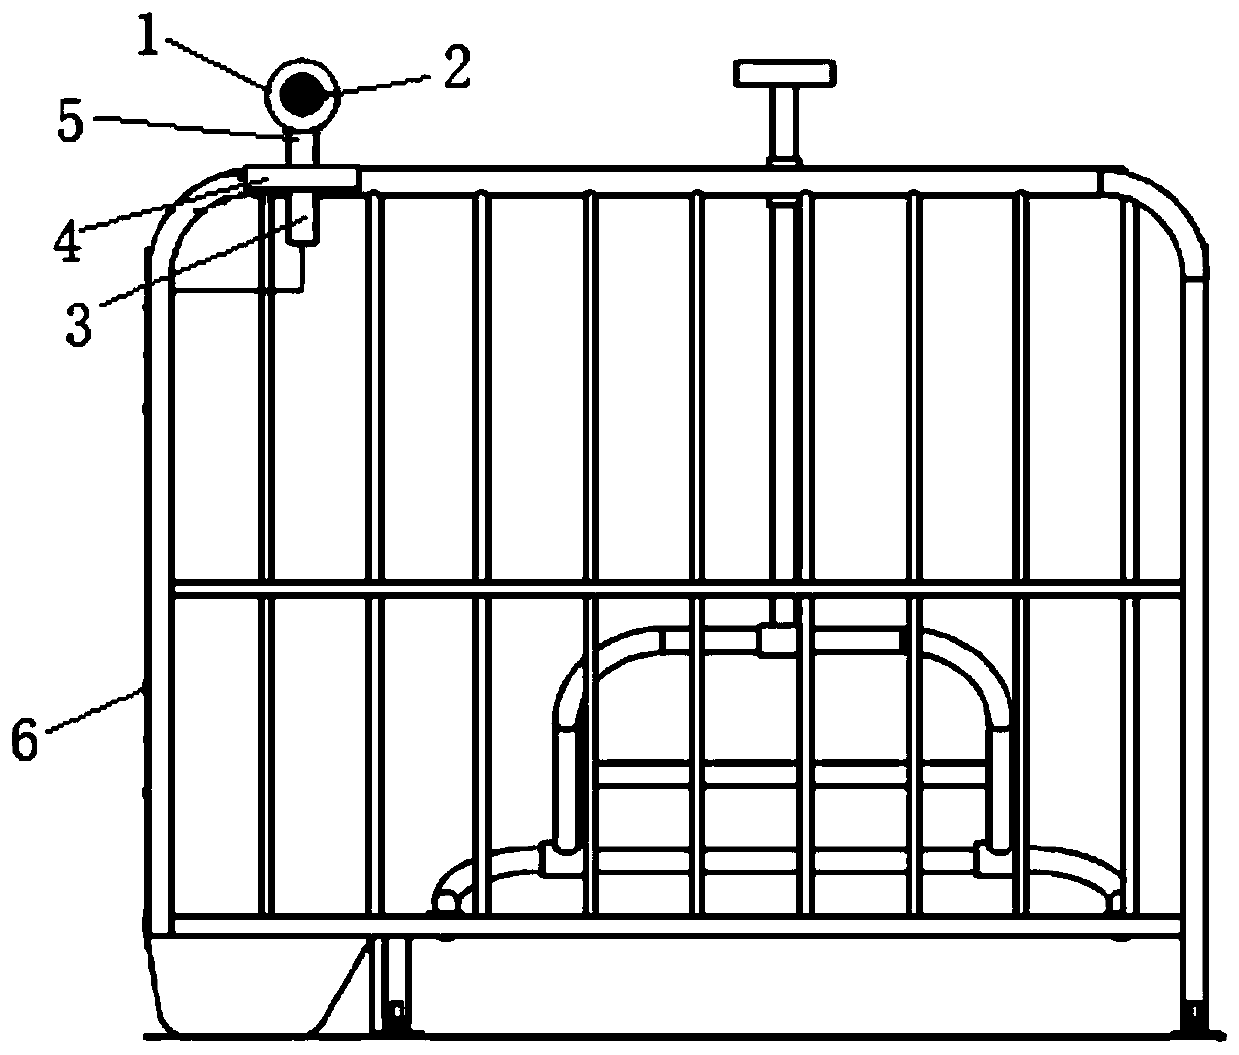 Livestock face recognition equipment and fence with same